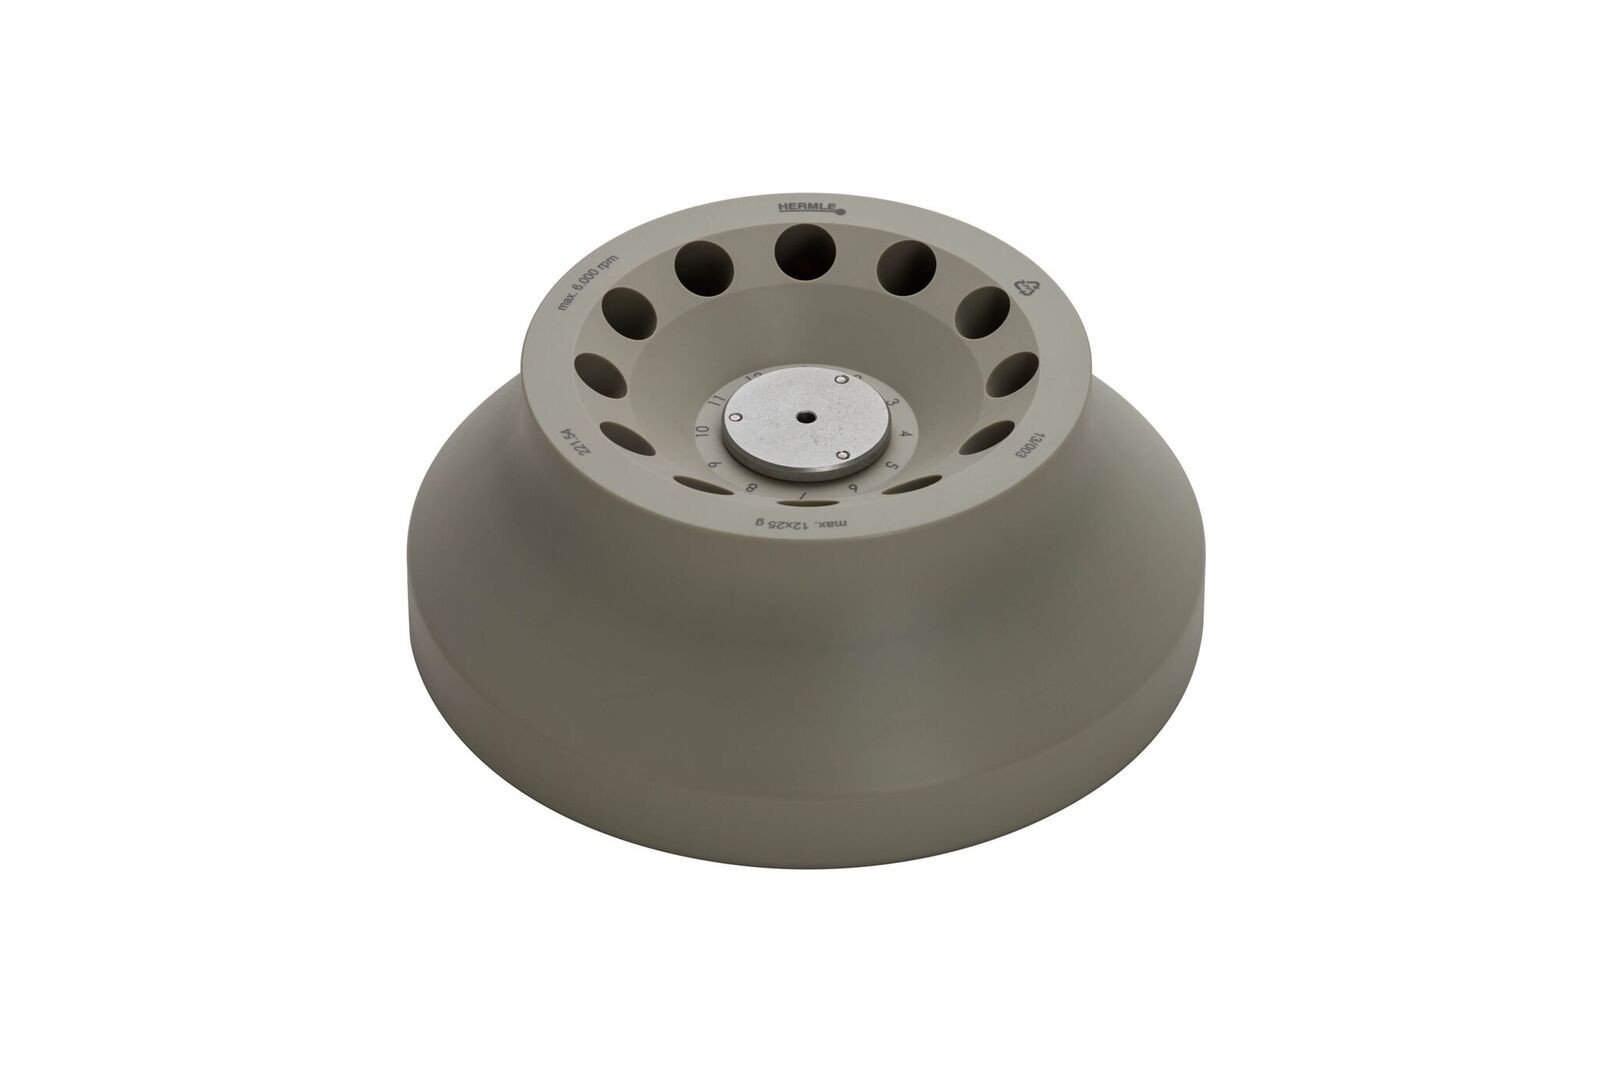 Hermle Angle Rotor 32° for 12 x 15 ml RB or Falcon tubes; Ø 17 mm for Small Centrifuge Z 206 A